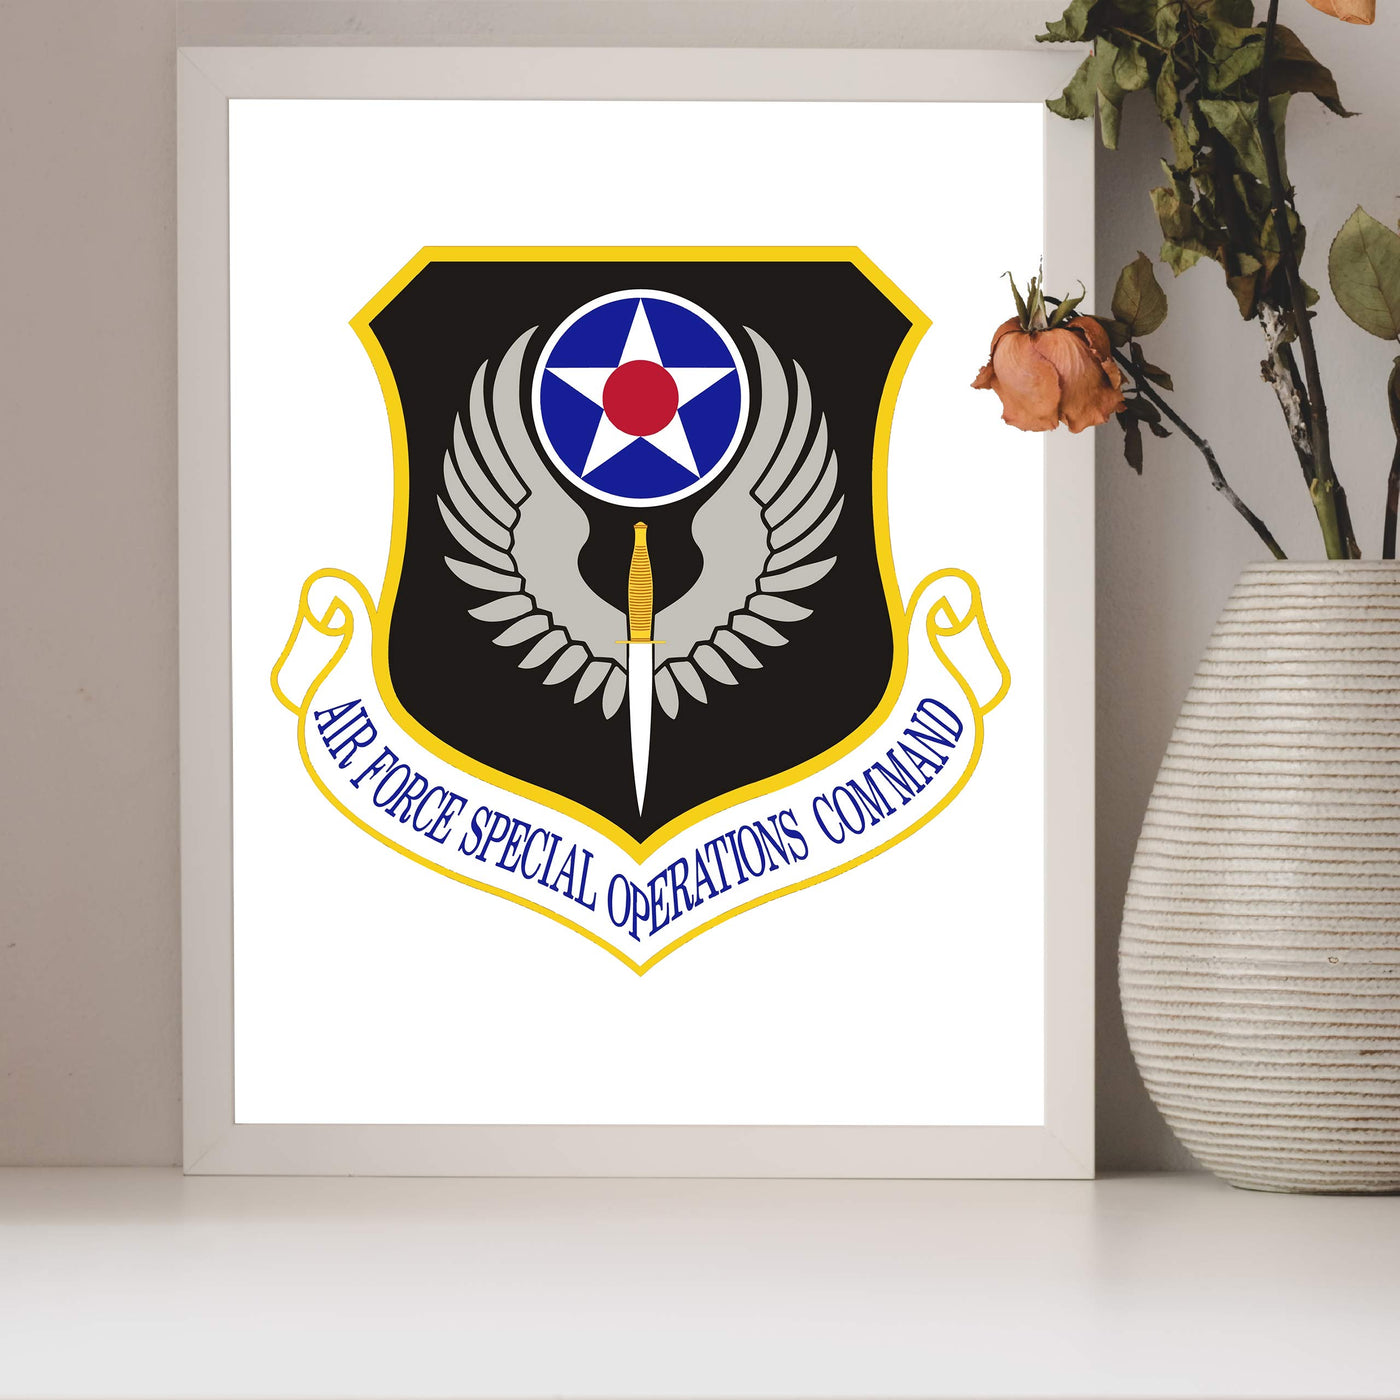 US Air Force Special Operations Command Logo- 8 x 10"- Military Wall Art Print- Ready to Frame. Patriotic Home-Office-Bar-Cave-Lodge Decor. Perfect Gift for Those Who Served. Display Your Pride!